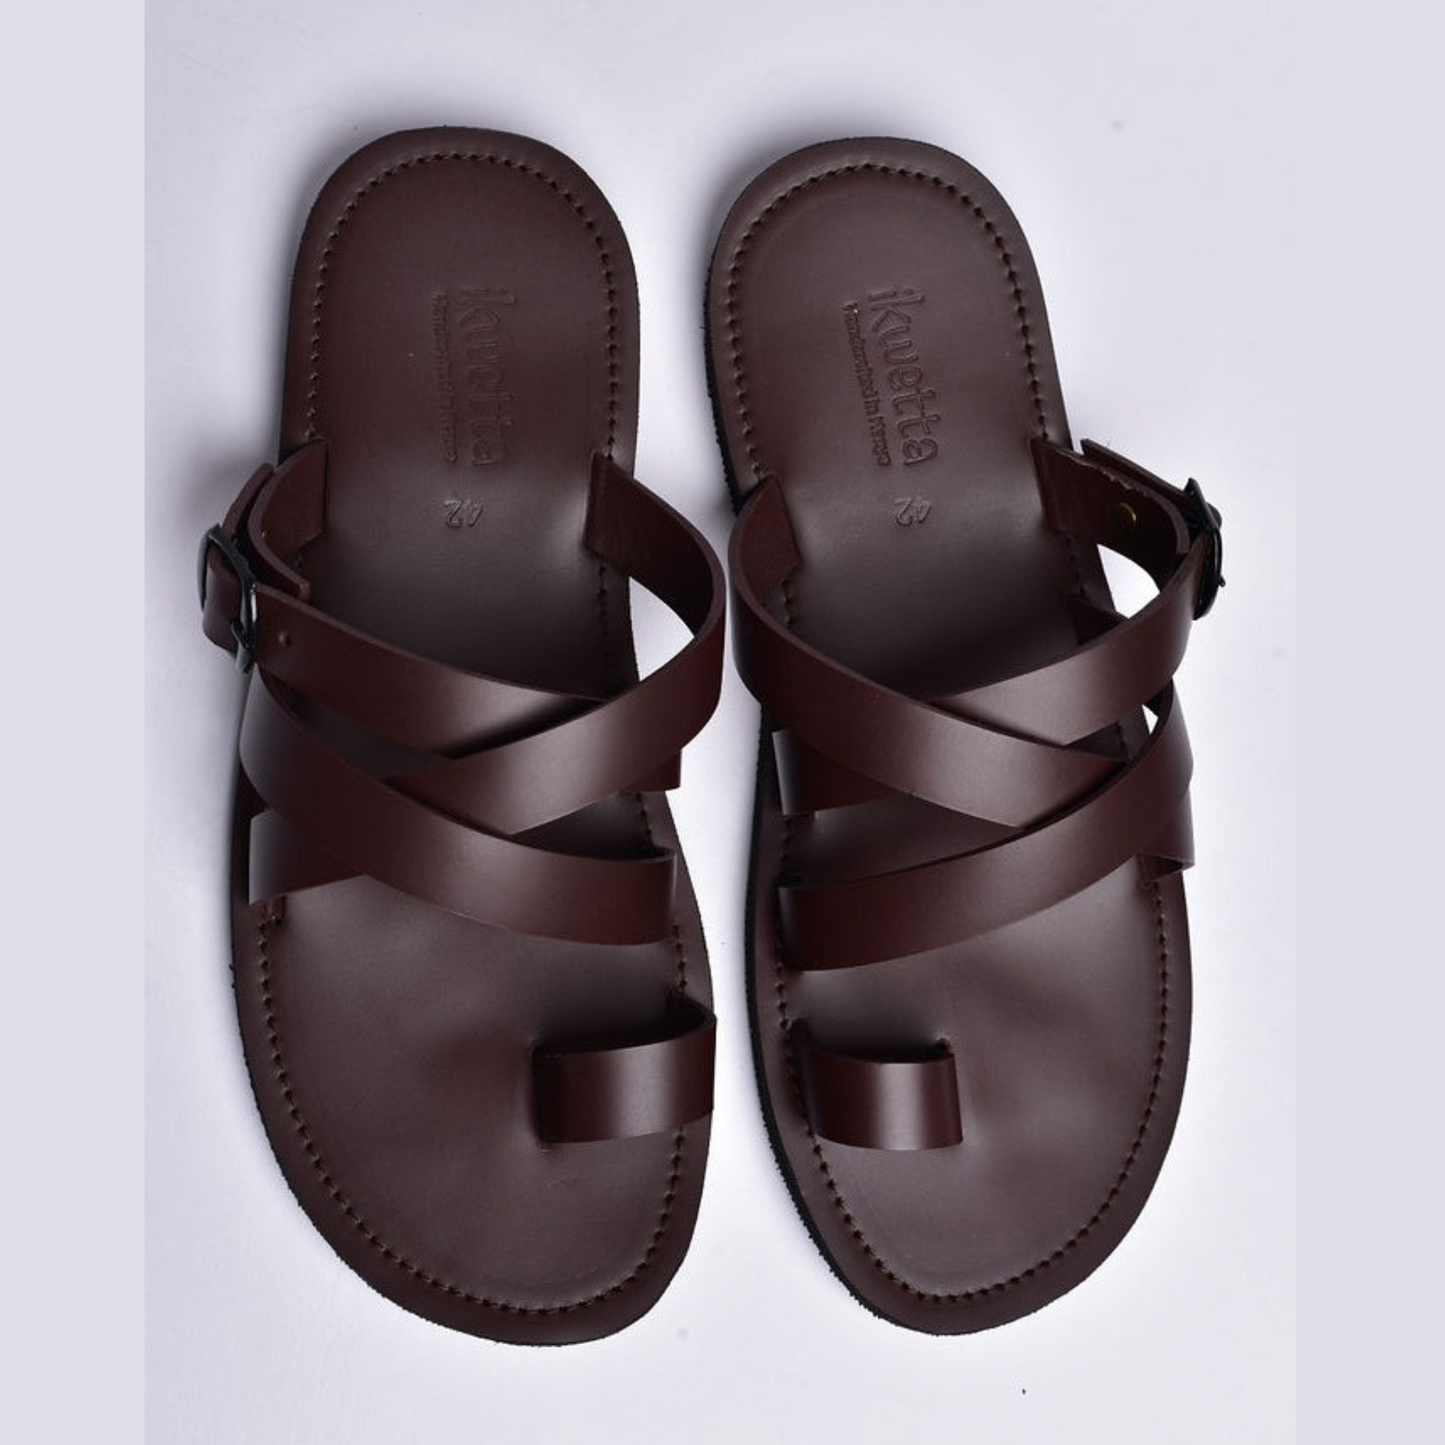 Smart buckle sandals for men in Brown smooth leather